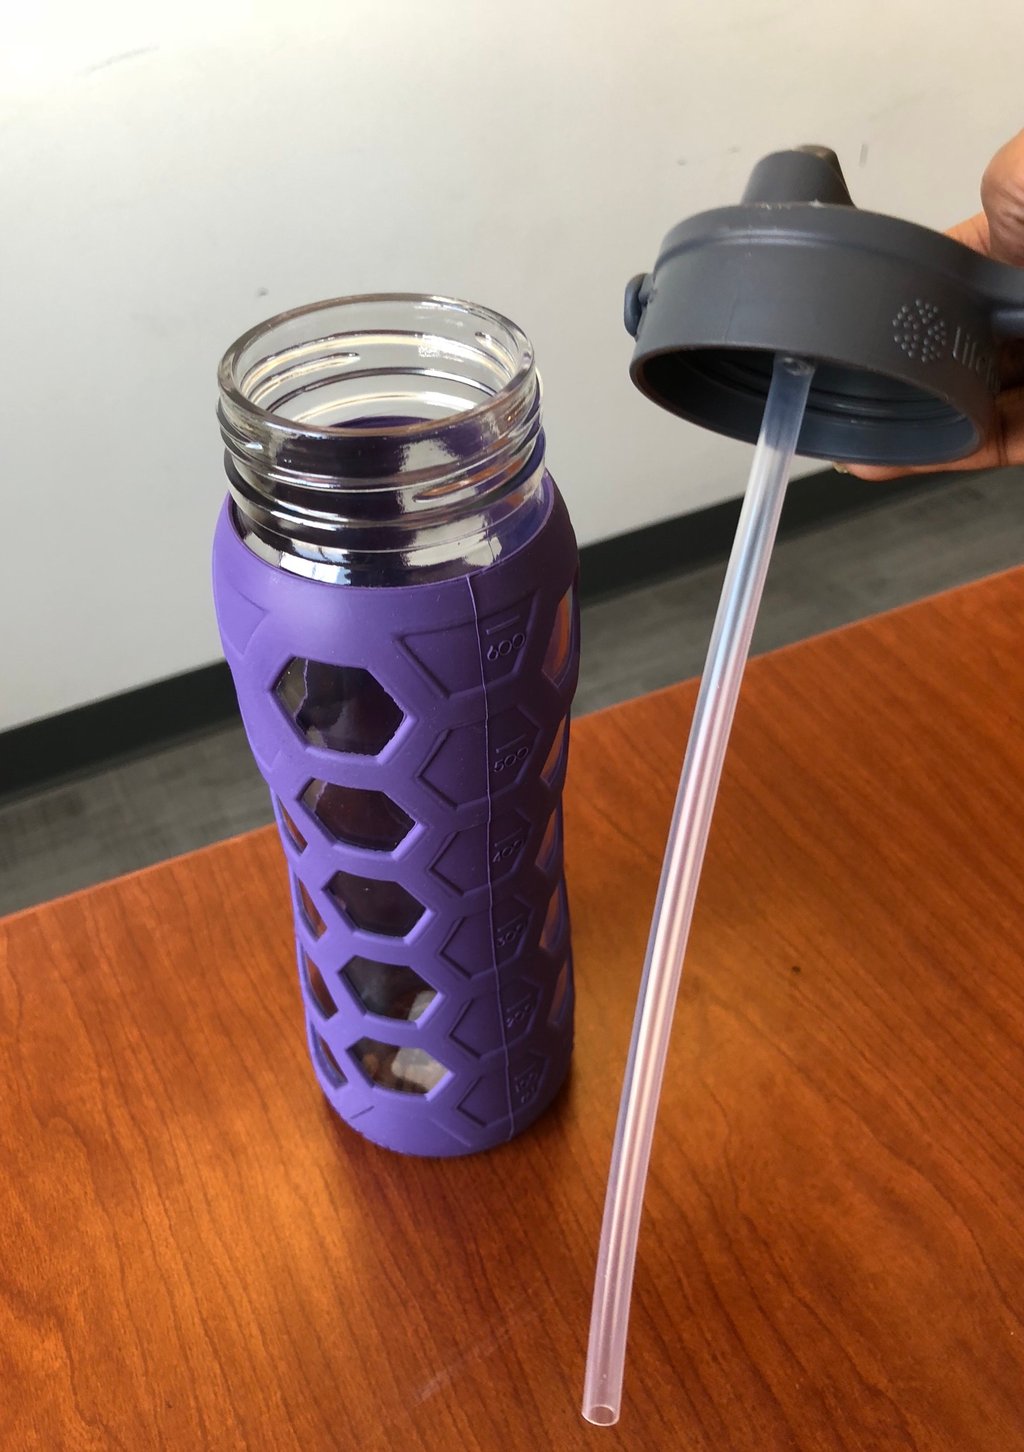 How to Clean Reusable Straws and Water Bottles